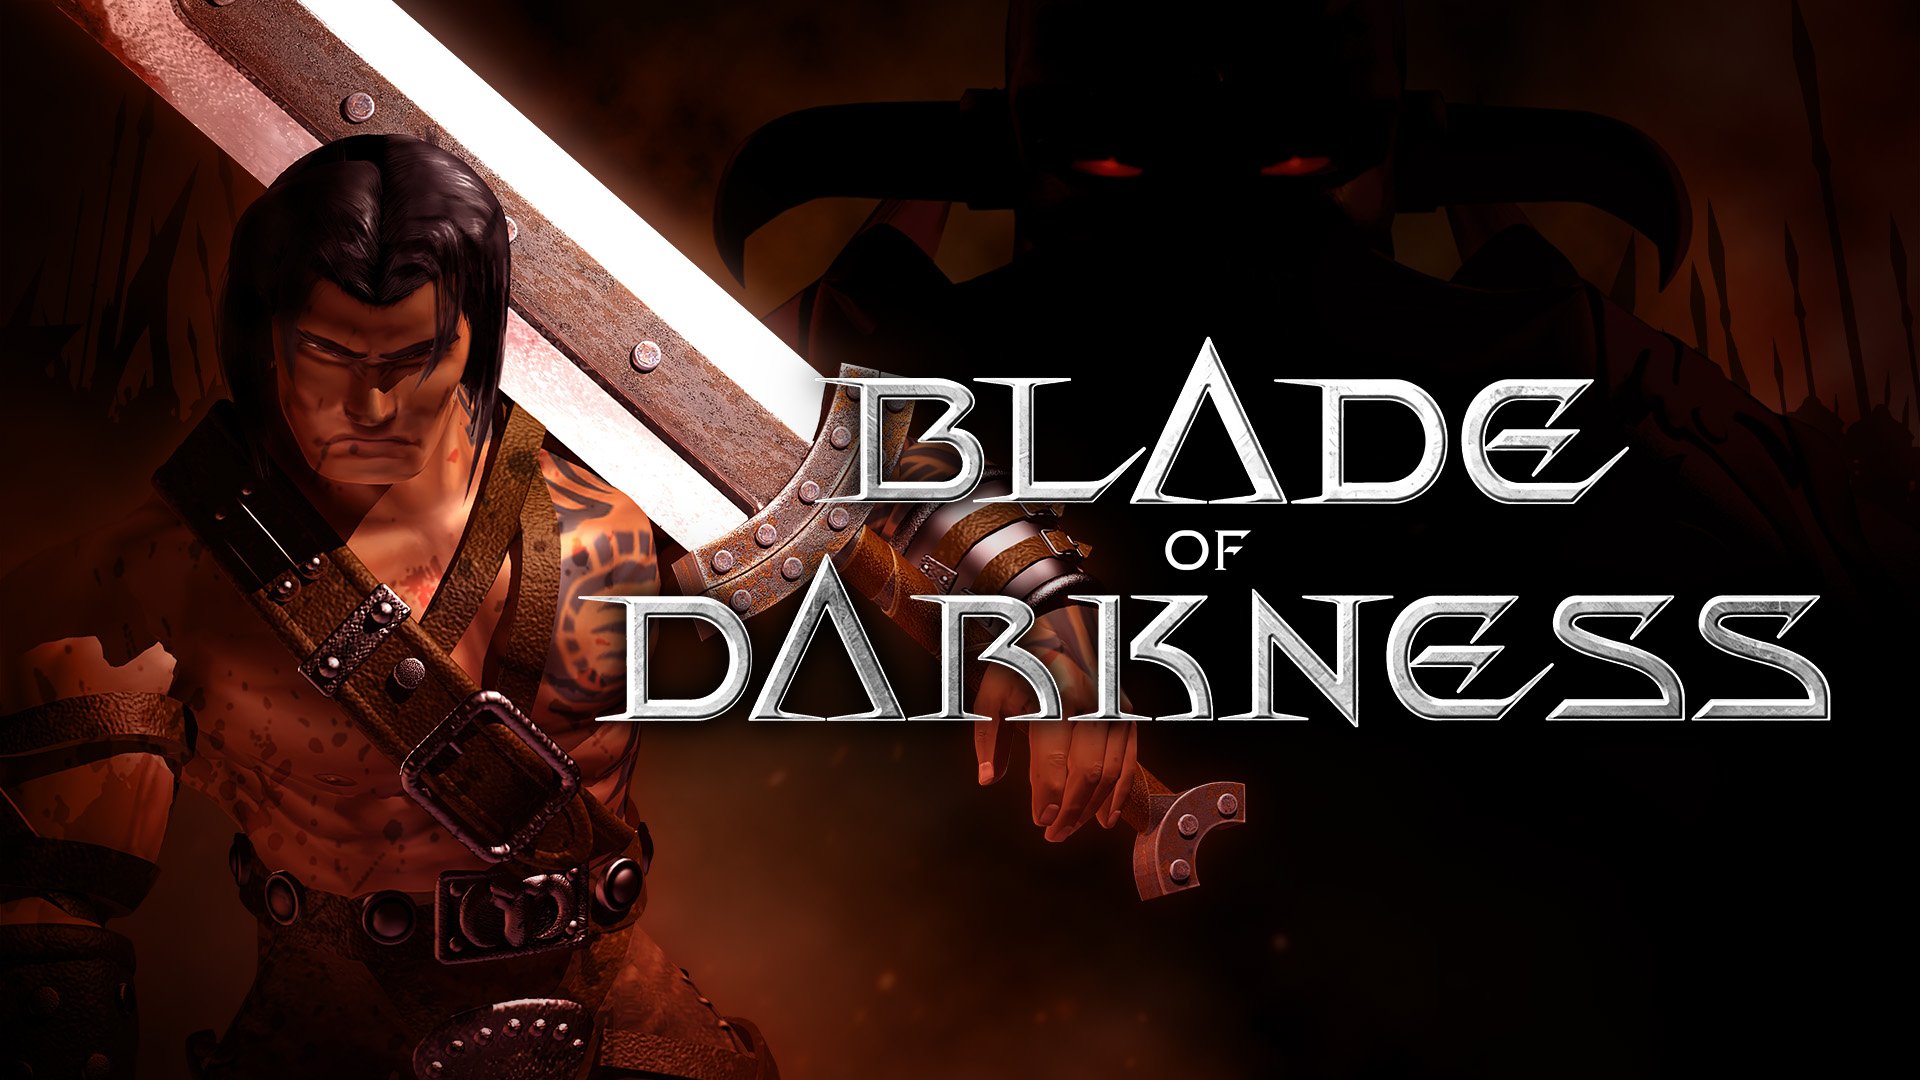 Hack and Slash Games, PC and Steam Keys